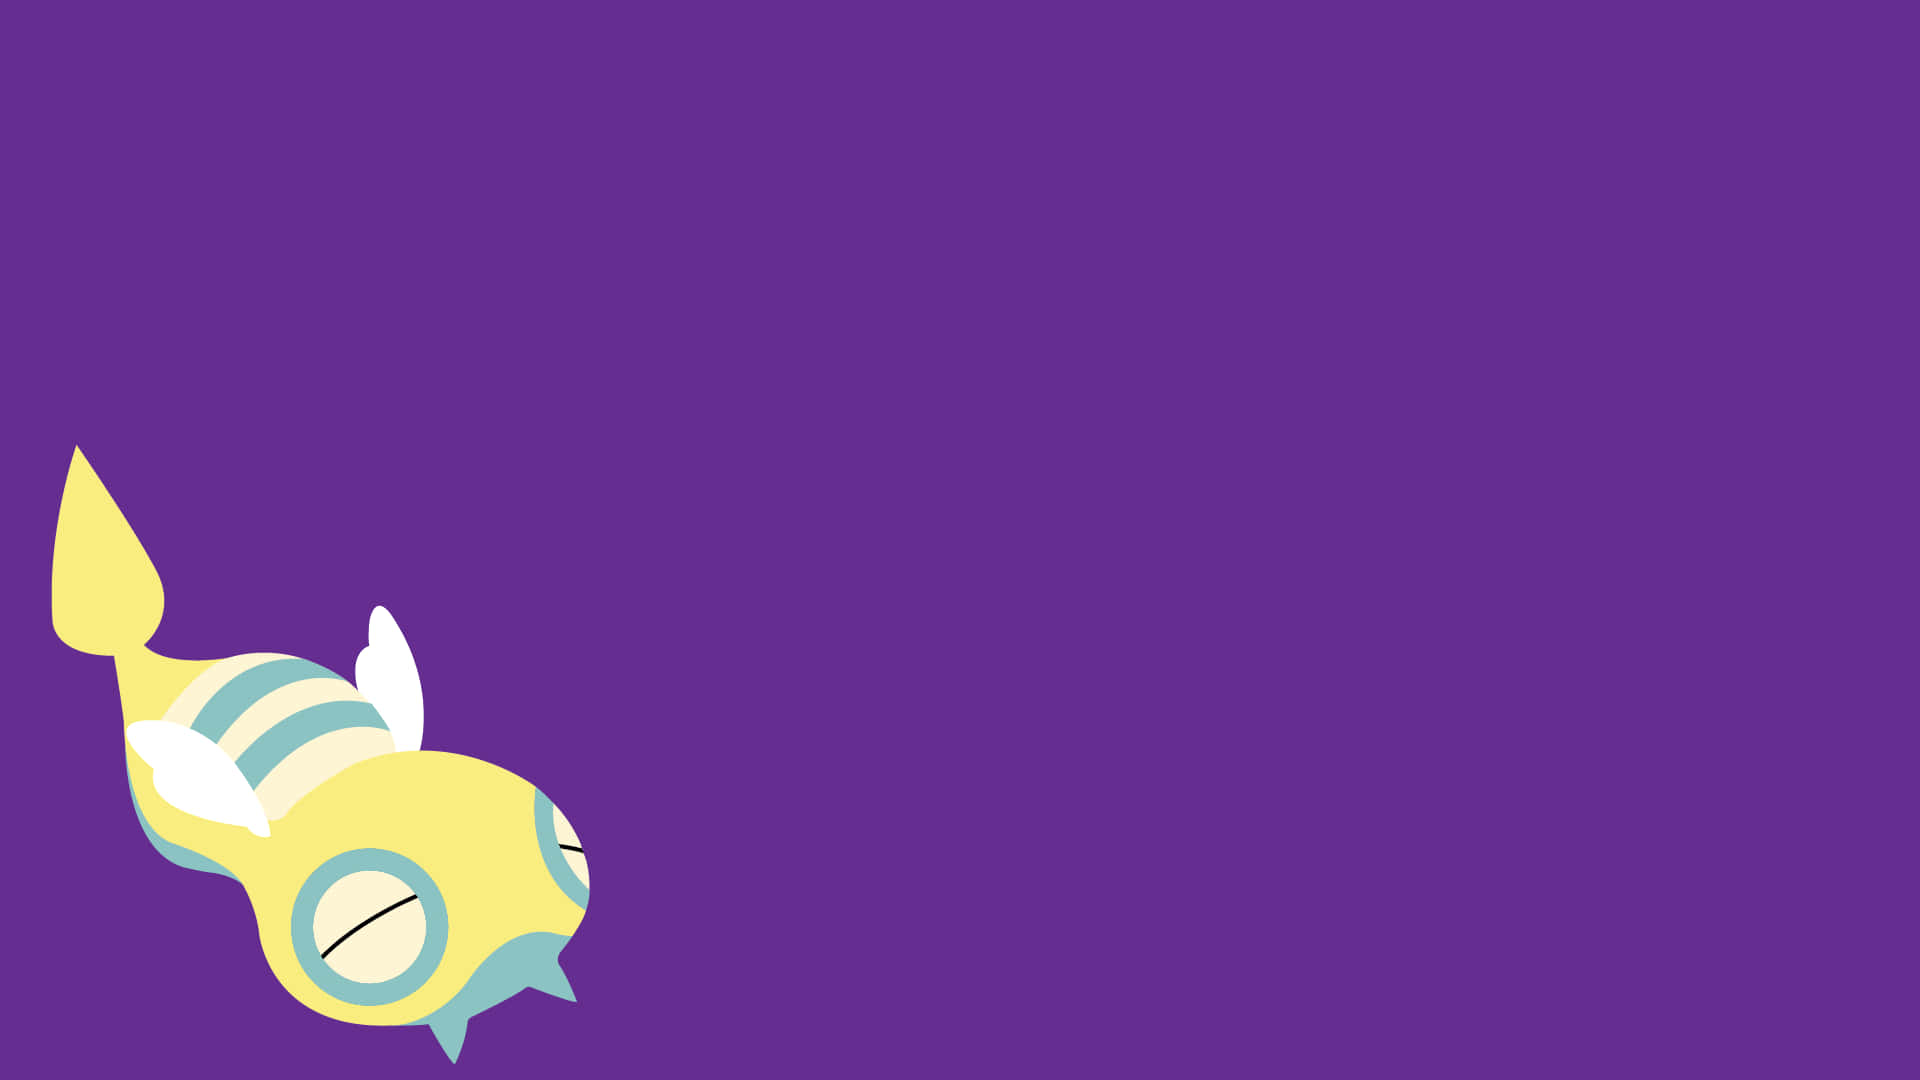 Liladunsparce (for A Computer Or Mobile Wallpaper With A Purple Dunsparce Design) Wallpaper